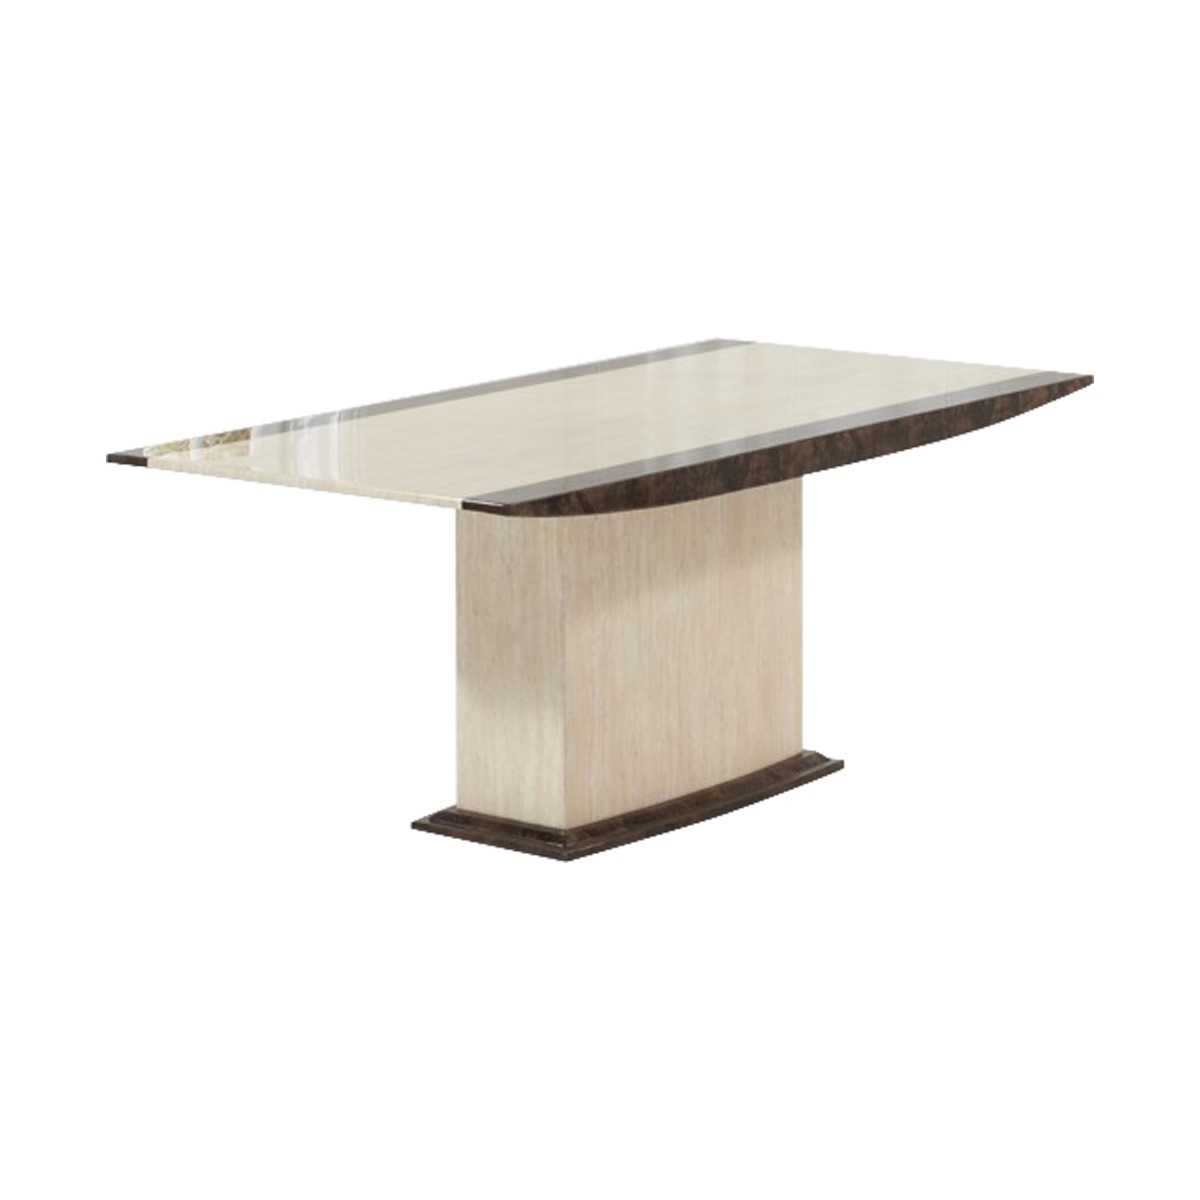 Alba Cream & Brown Marble Dining Table 6-8 Seater